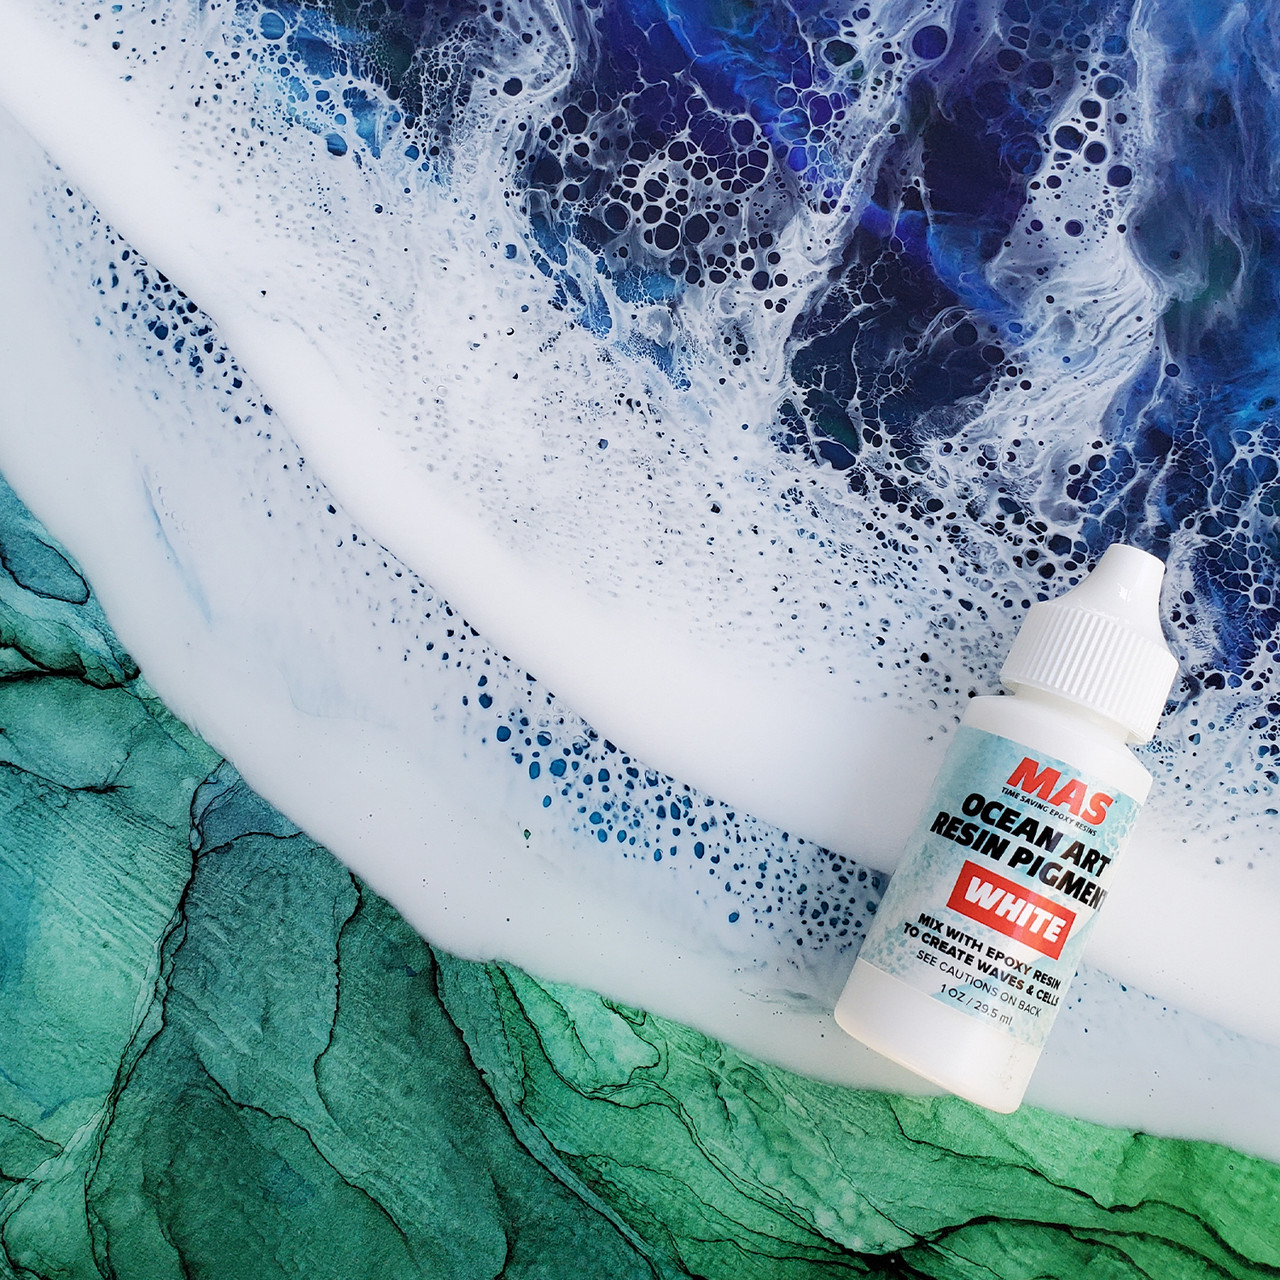  LETS RESIN Ocean White Epoxy Resin Pigment 167g/589oz, High  Concentrated Pigment Paste For Epoxy Resin & UV Resin, UV Resistant Opaque  Pigment For Creates Cells & Lacing, 3D Flower Resin